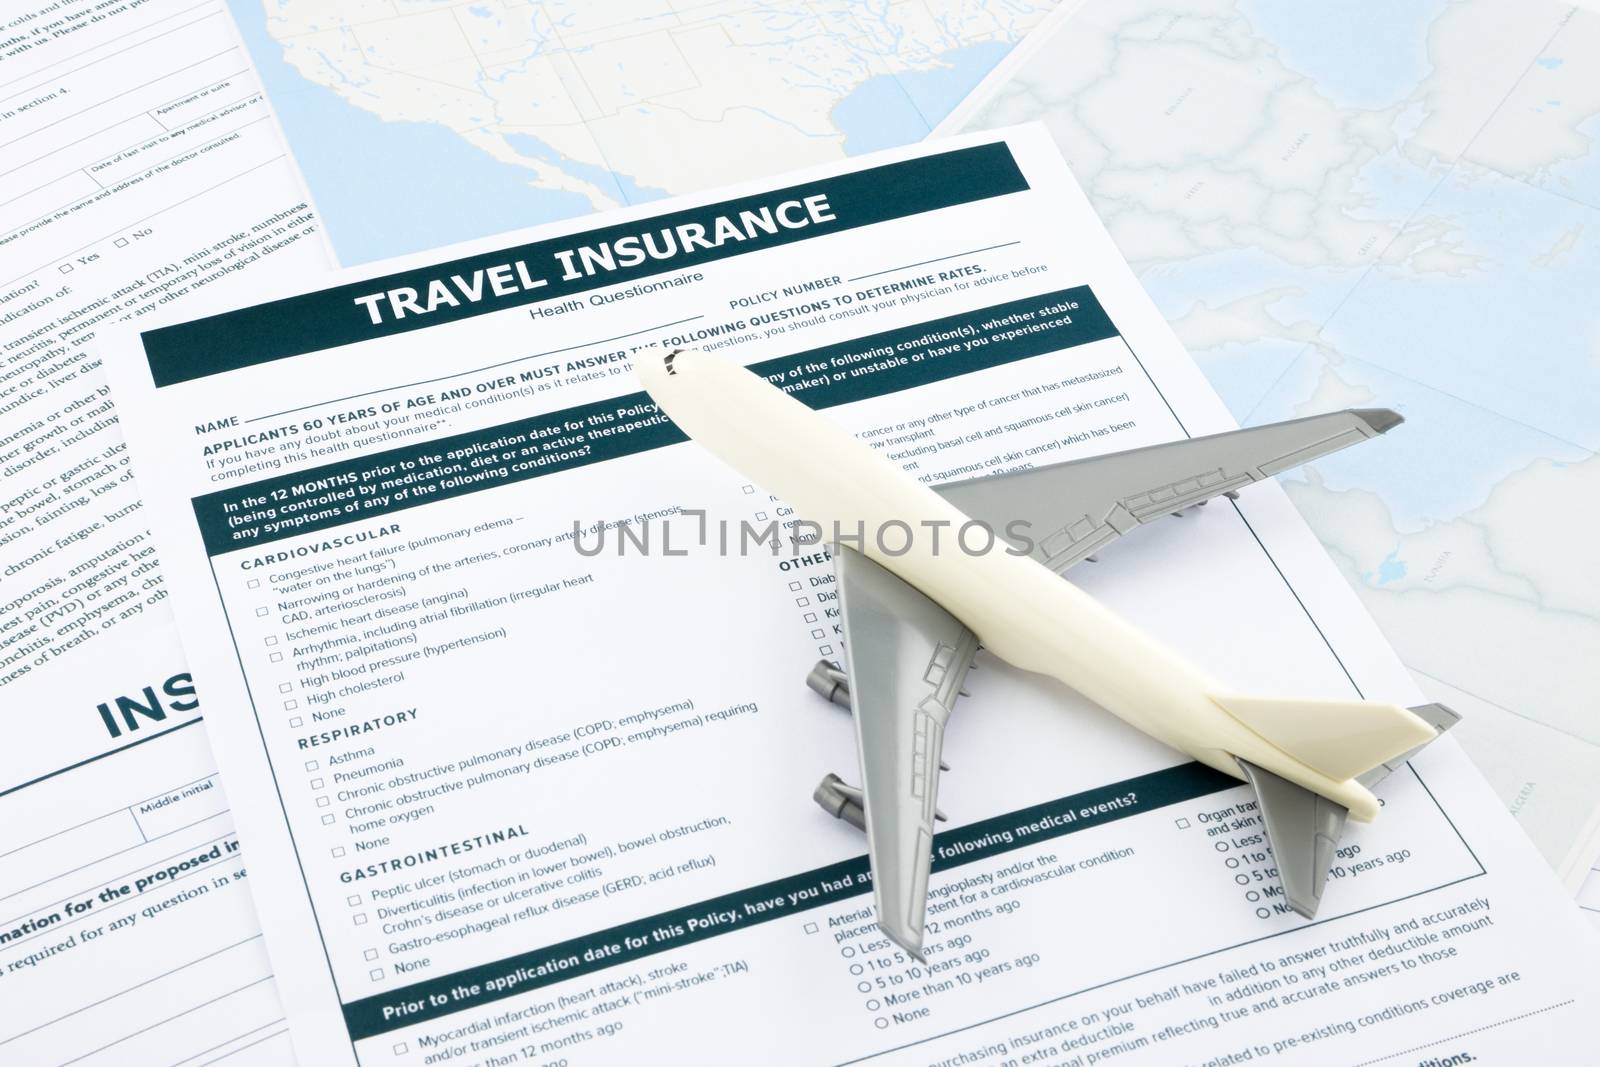 travel insurance form and   plane model on world map paperwork, concept and idea for insurance business